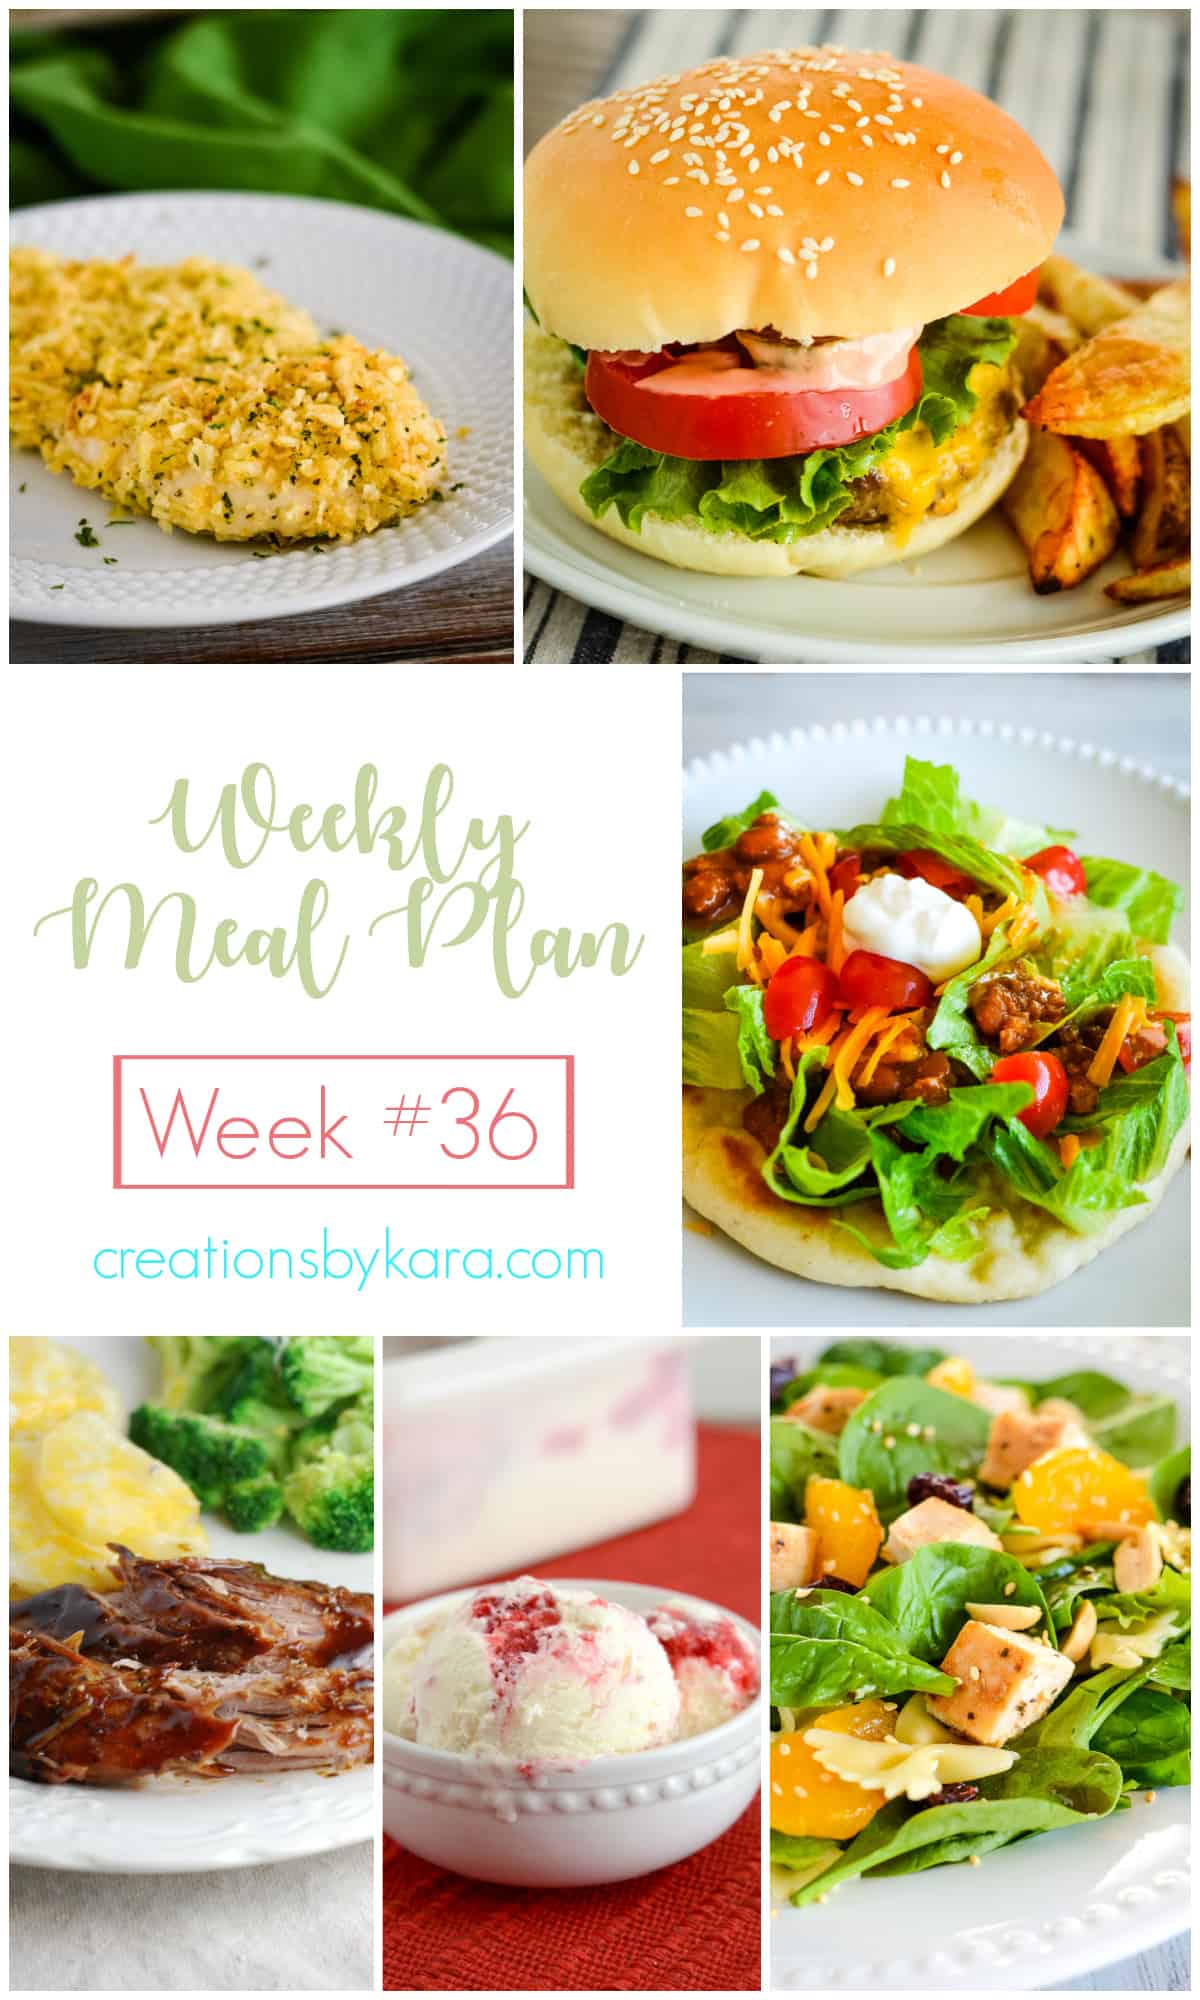 weekly meal plan #36 collage